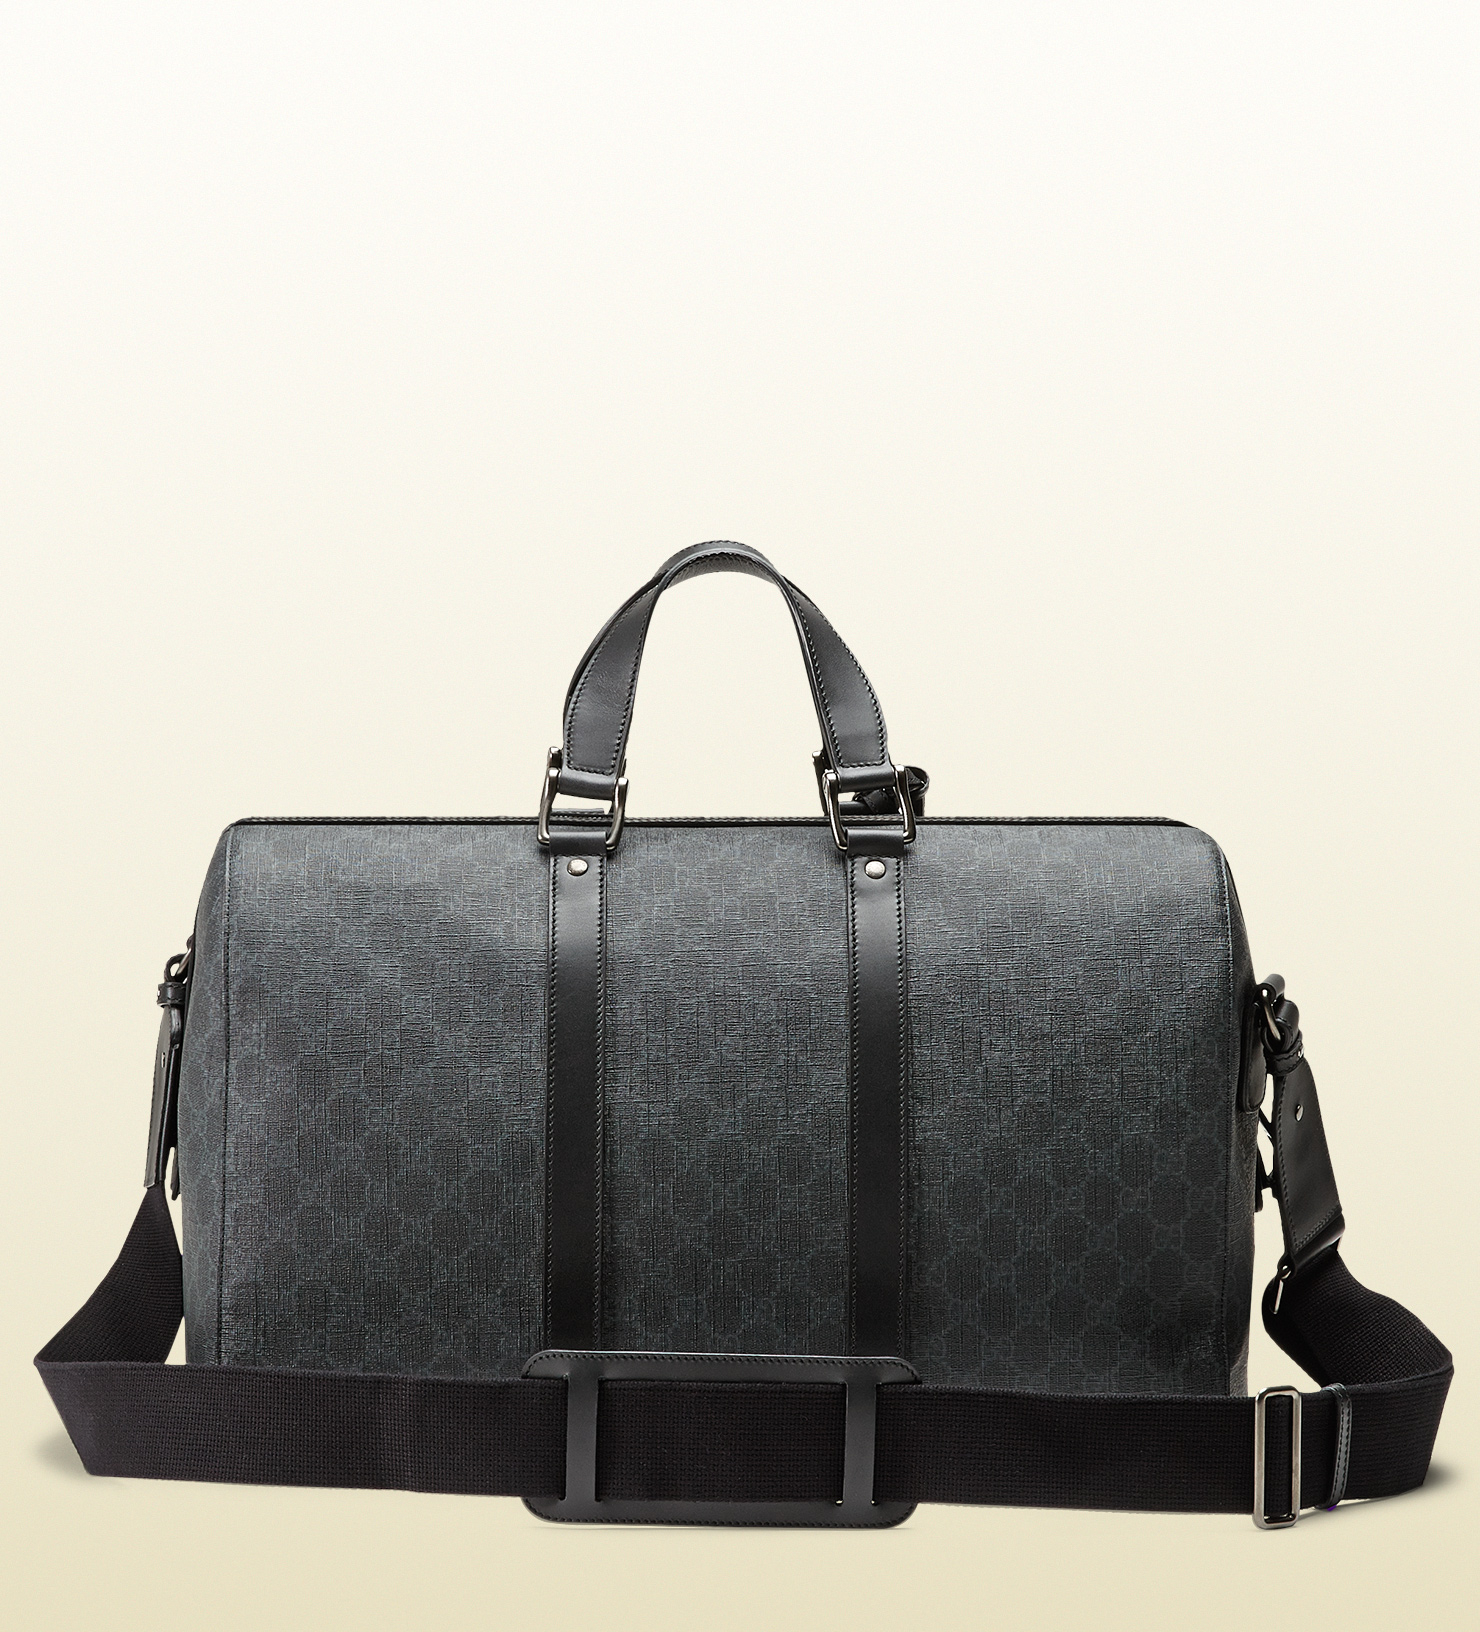 Lyst - Gucci Gg Supreme Canvas Carry-on Duffle Bag in Black for Men